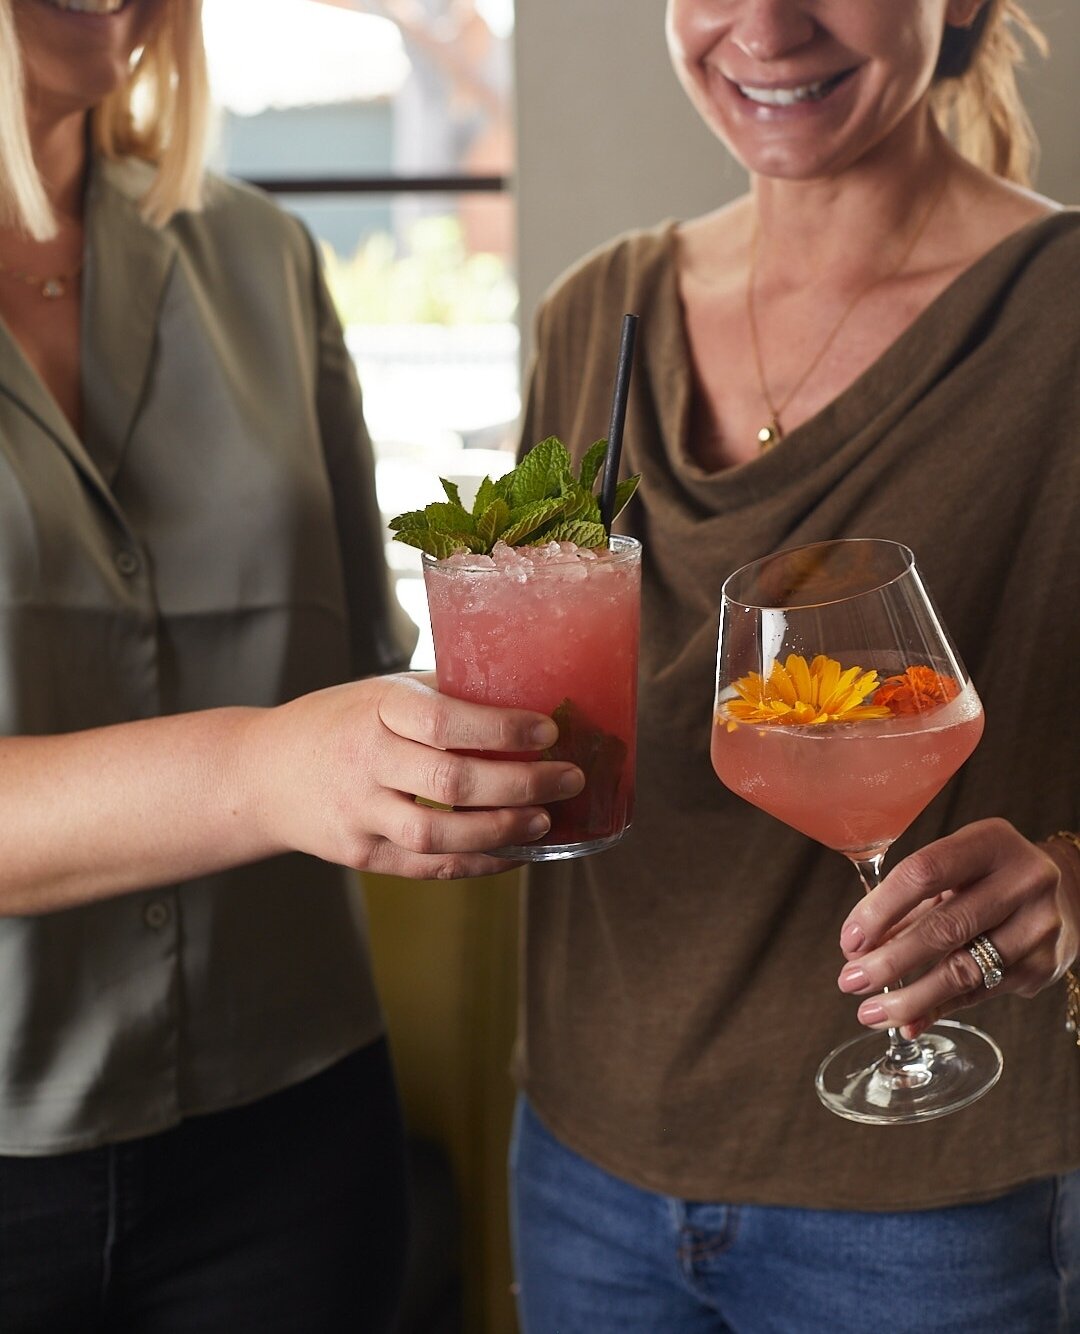 Cheers to Mom! 🍹 Treat her to a table at the Bistro for next Sunday&rsquo;s special prix fixe Mother&rsquo;s Day brunch, 10am - 3pm, May 14th 💐 ⁠
⁠
Menu and reservations are linked in the bio.